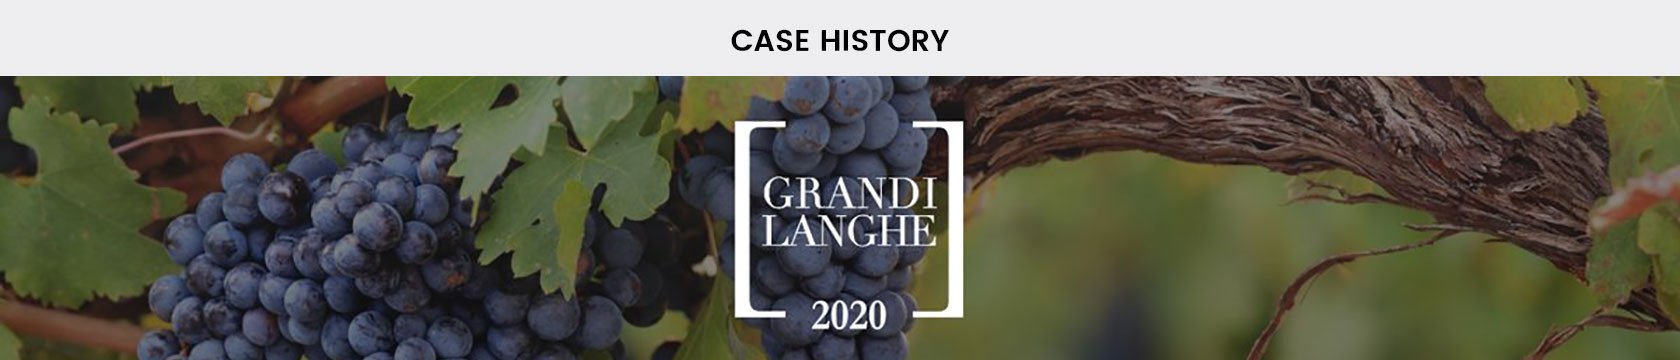 Clappit-Expo-Exhibitor-Case-History-Grandi-Langhe-Top-01